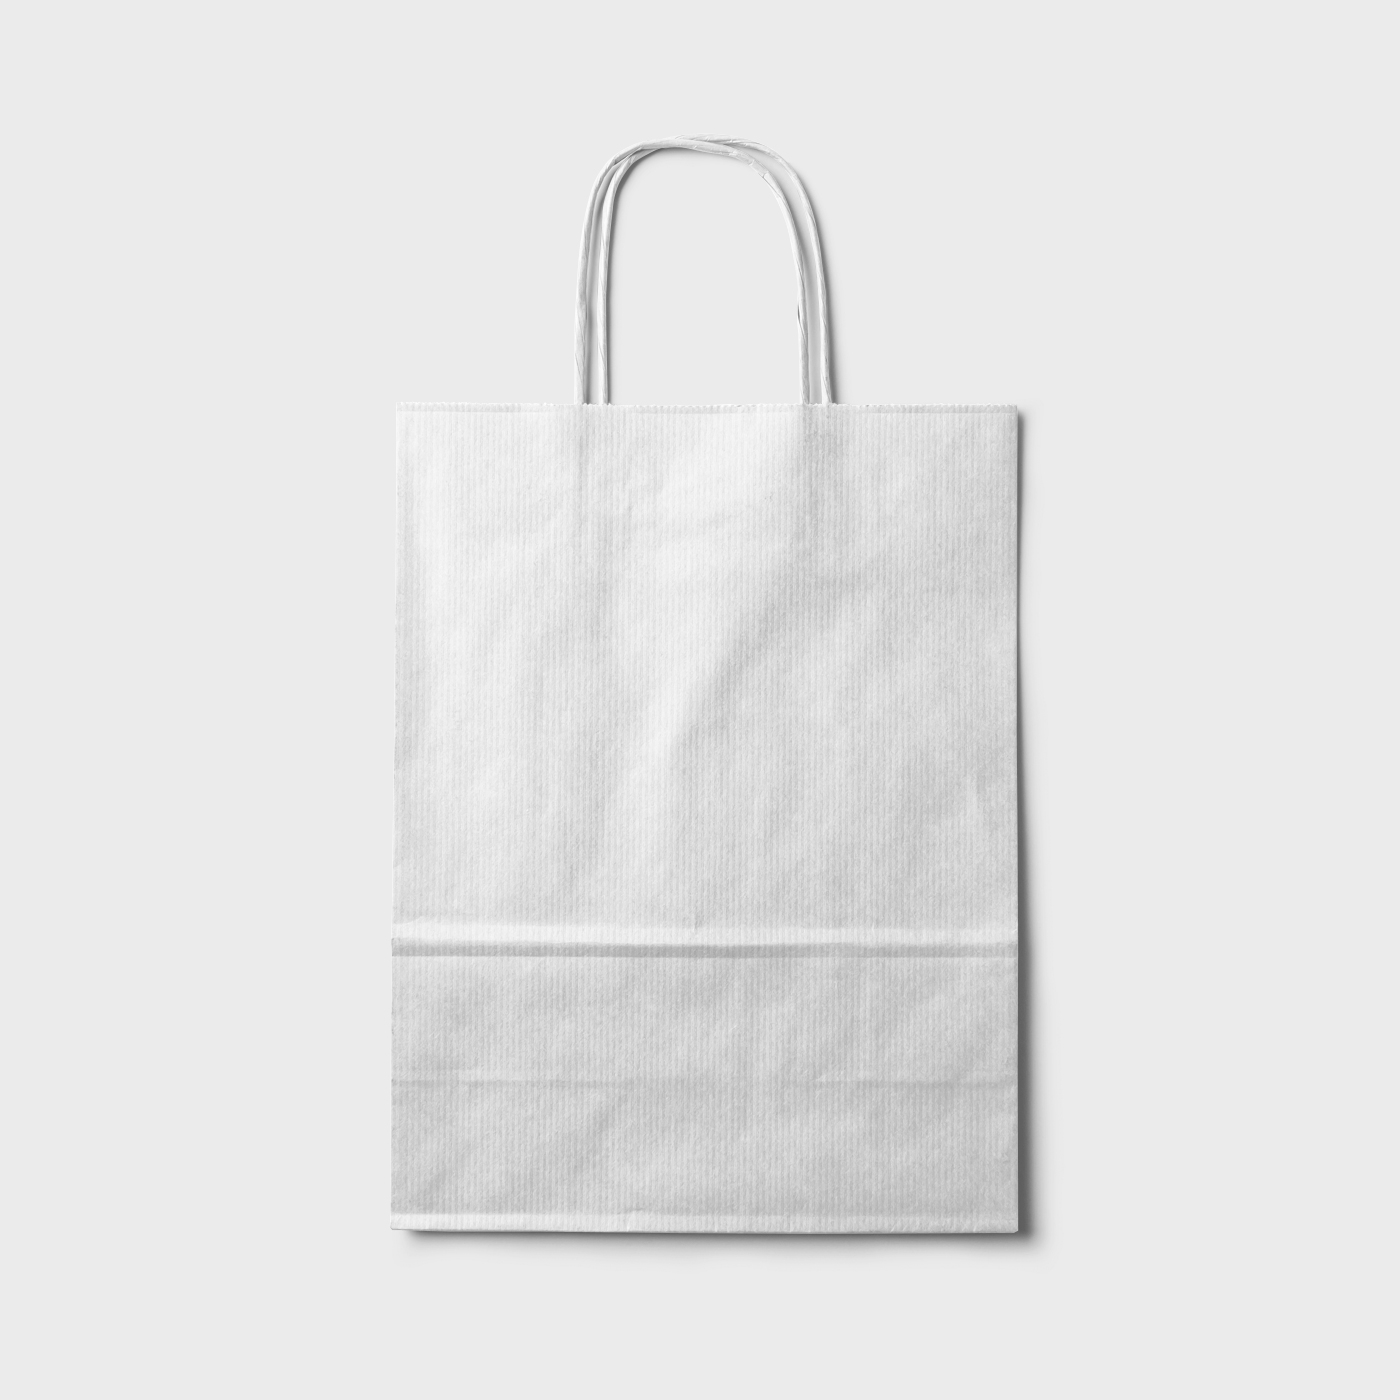 Front View of Paper Shopping Bag Mockup FREE PSD